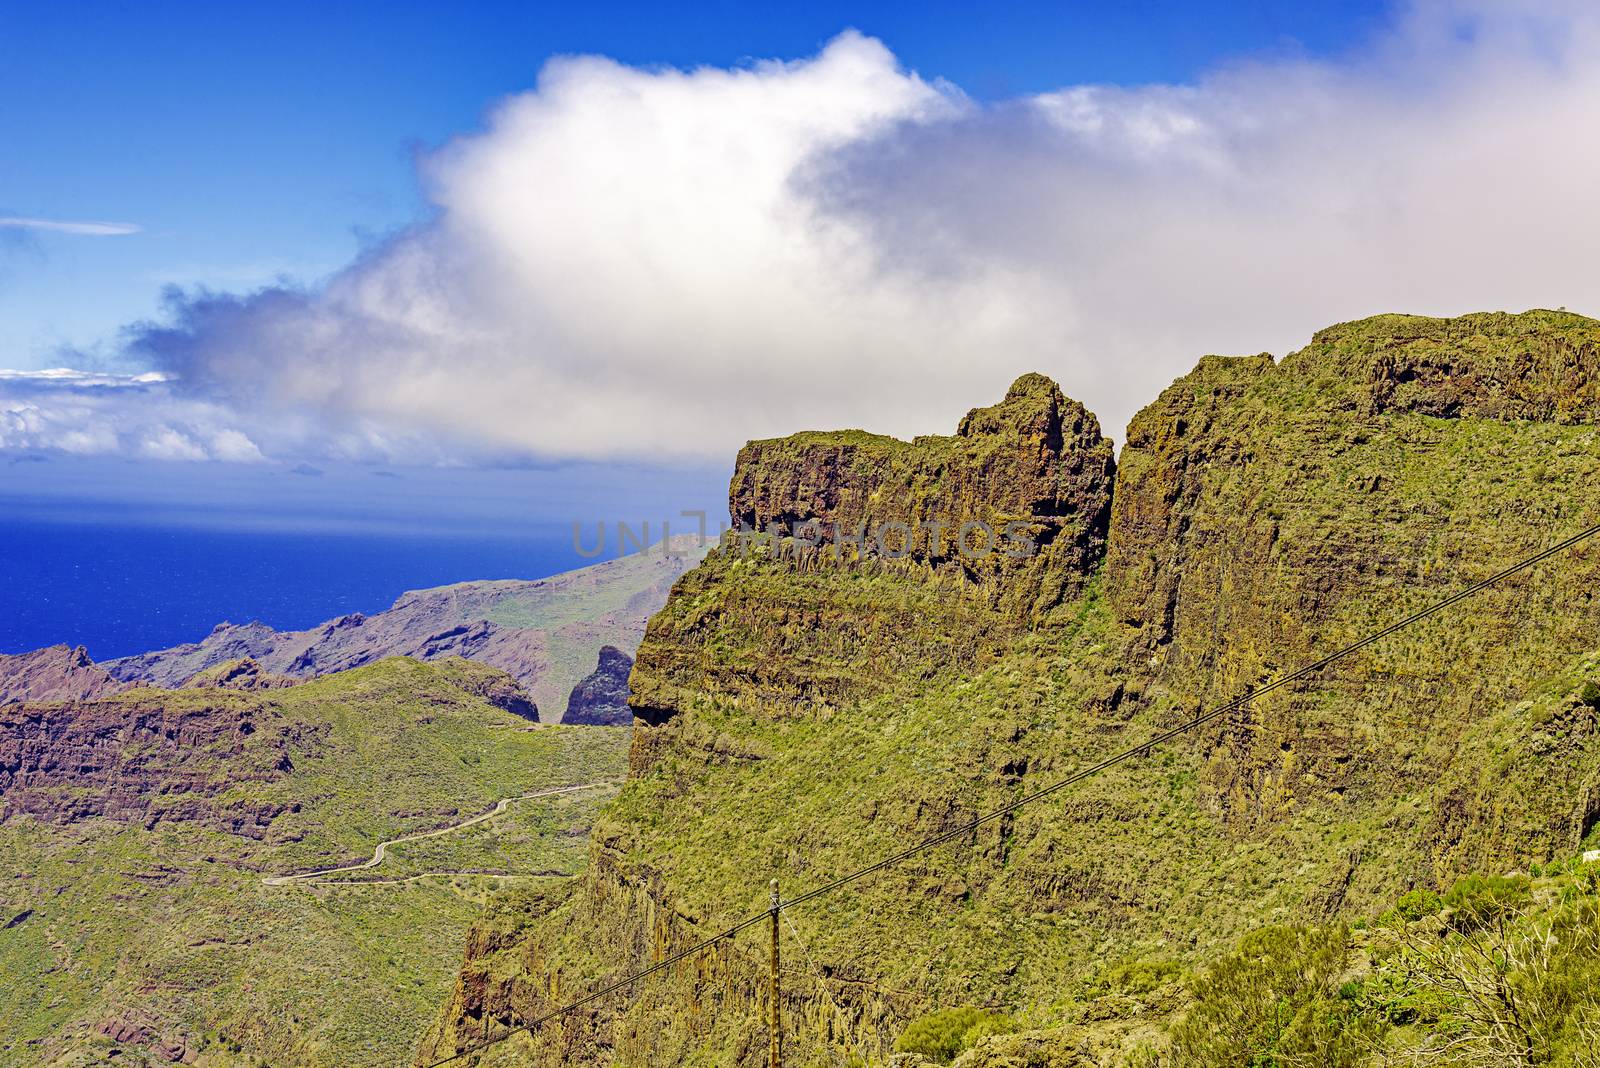 Masca Village and valley in Tenerife by Nanisimova